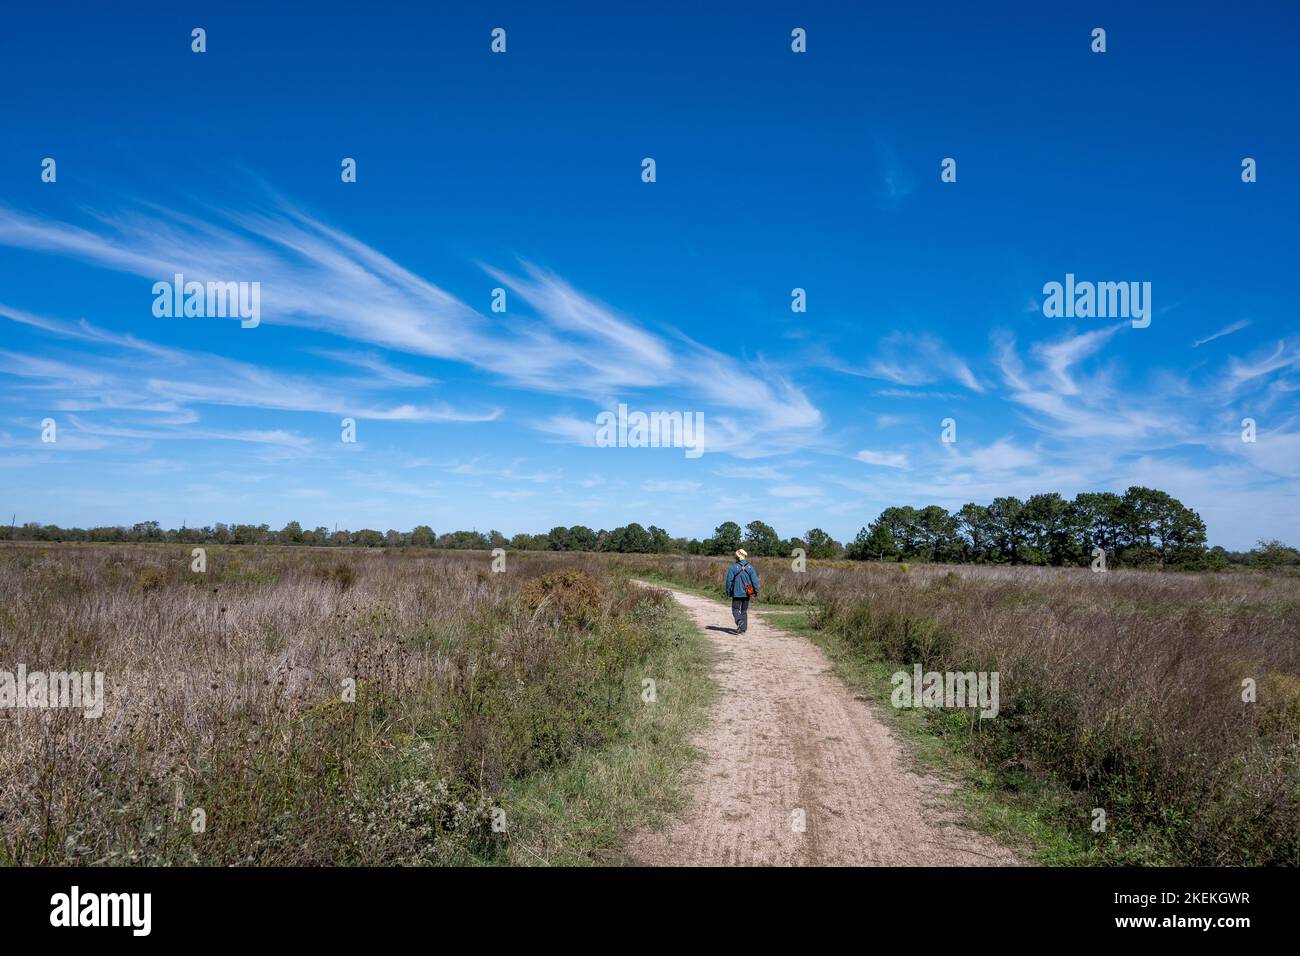 Location A hiker walking on the trail at the Katy Prairie Conservancy Indiangrass Preserve. Houston, Texas, USA. Stock Photo